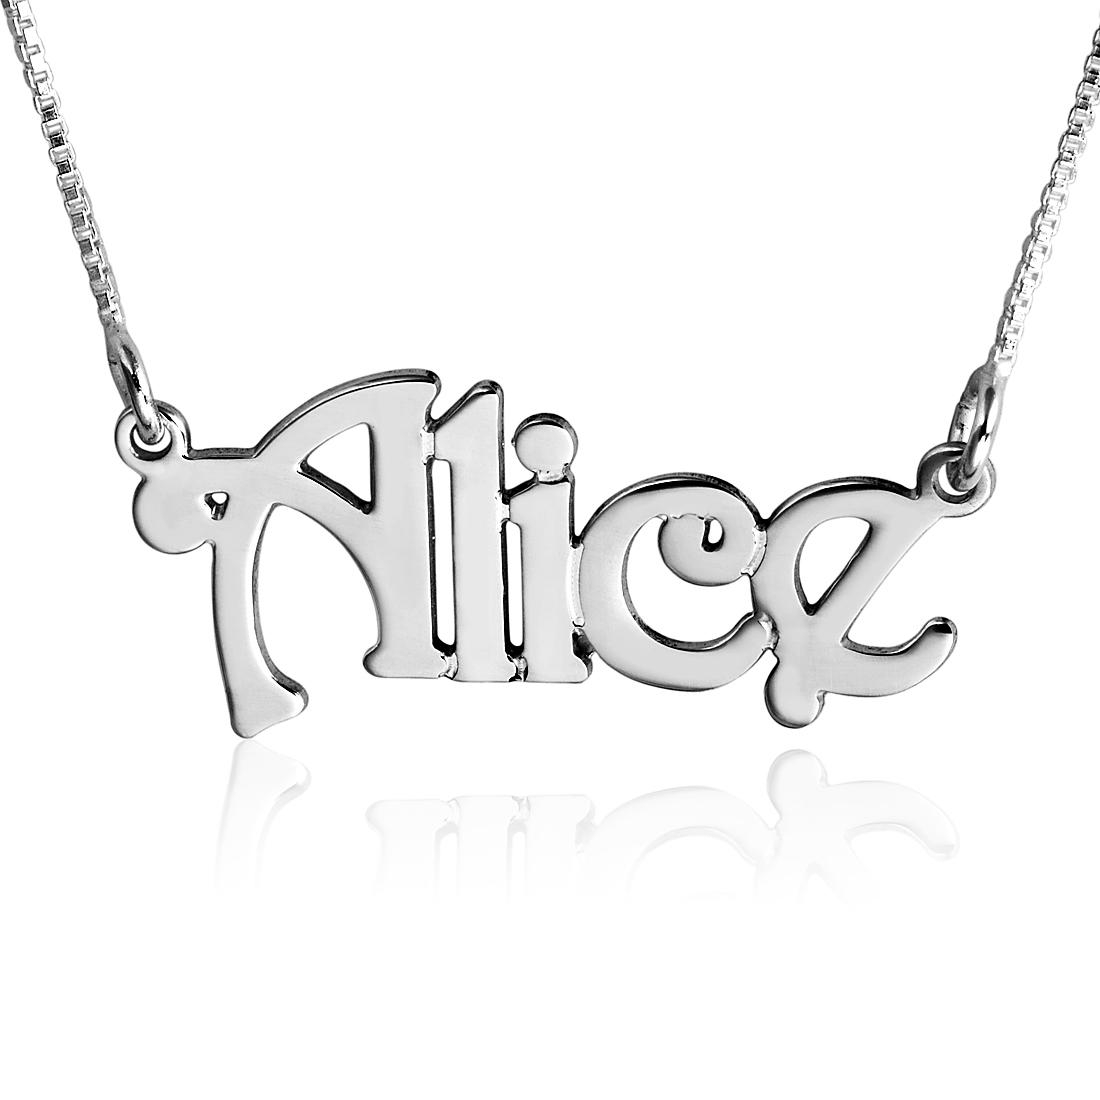 14K White Gold Victorian Style Name Necklace - 1